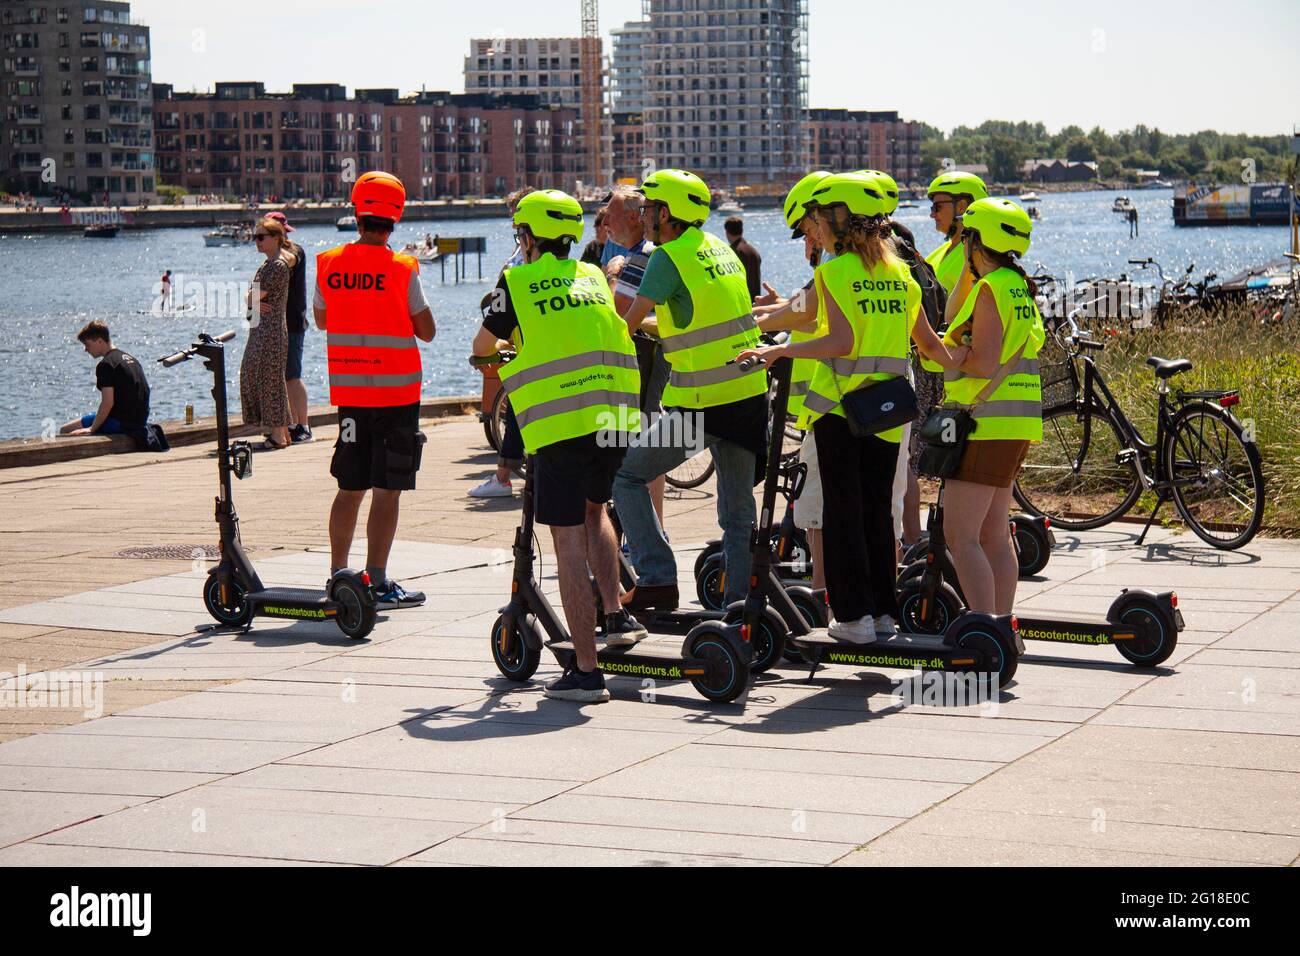 Group of young people on scooter guided sightseeing tour is stopping by an urban harbor in sunny weathersun, looking, travel, buildings. Copenhagen, D Stock Photo